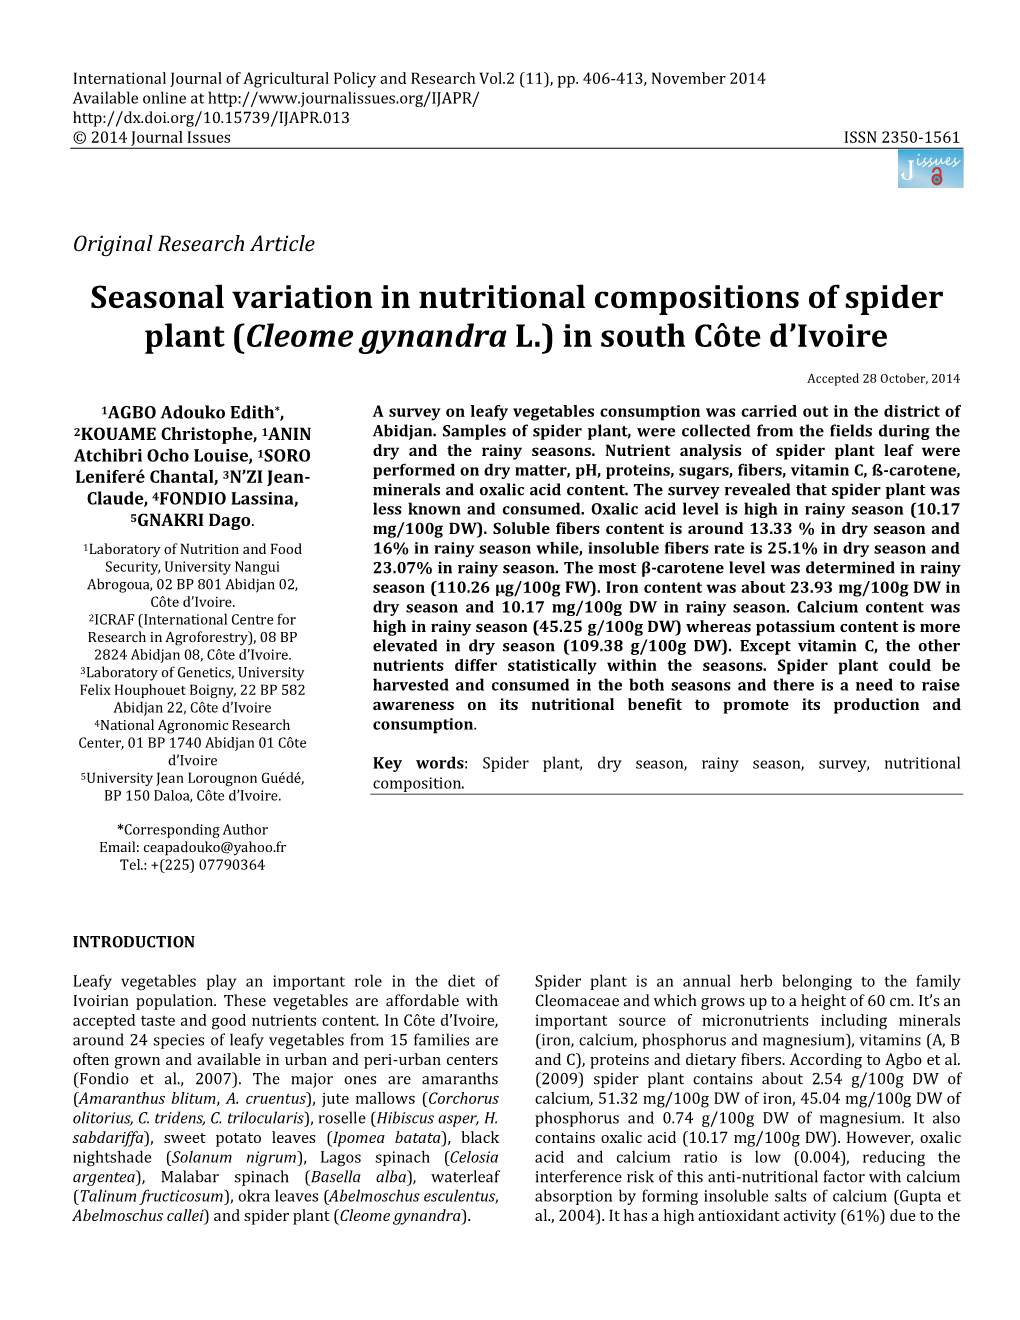 Seasonal Variation in Nutritional Compositions of Spider Plant (Cleome Gynandra L.) in South Côte D’Ivoire